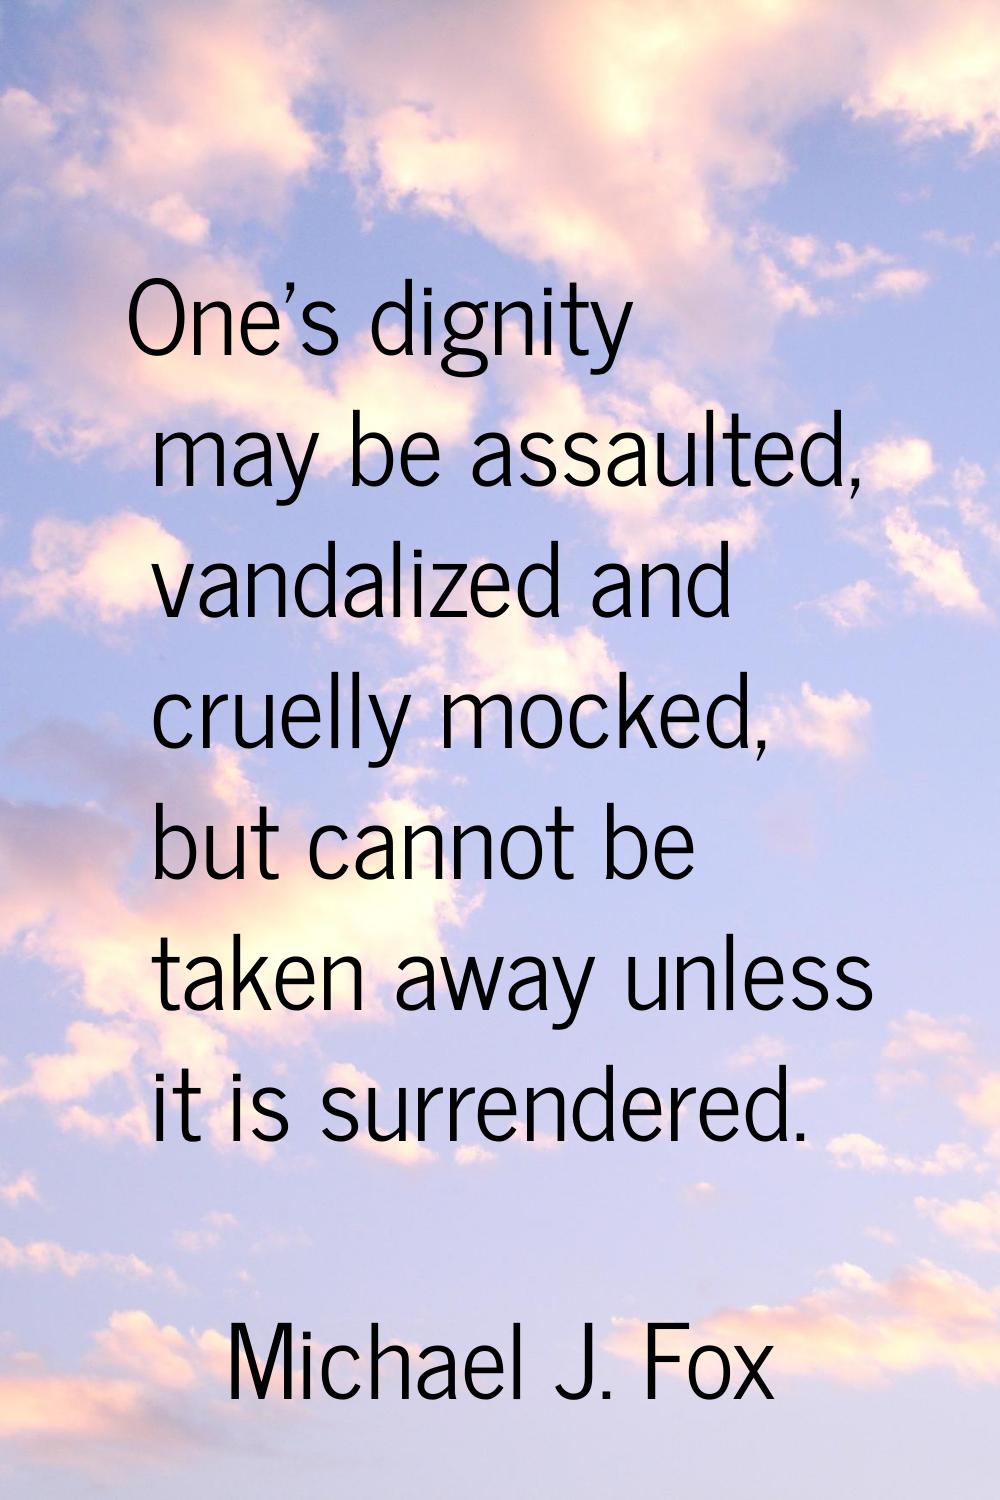 One's dignity may be assaulted, vandalized and cruelly mocked, but cannot be taken away unless it i